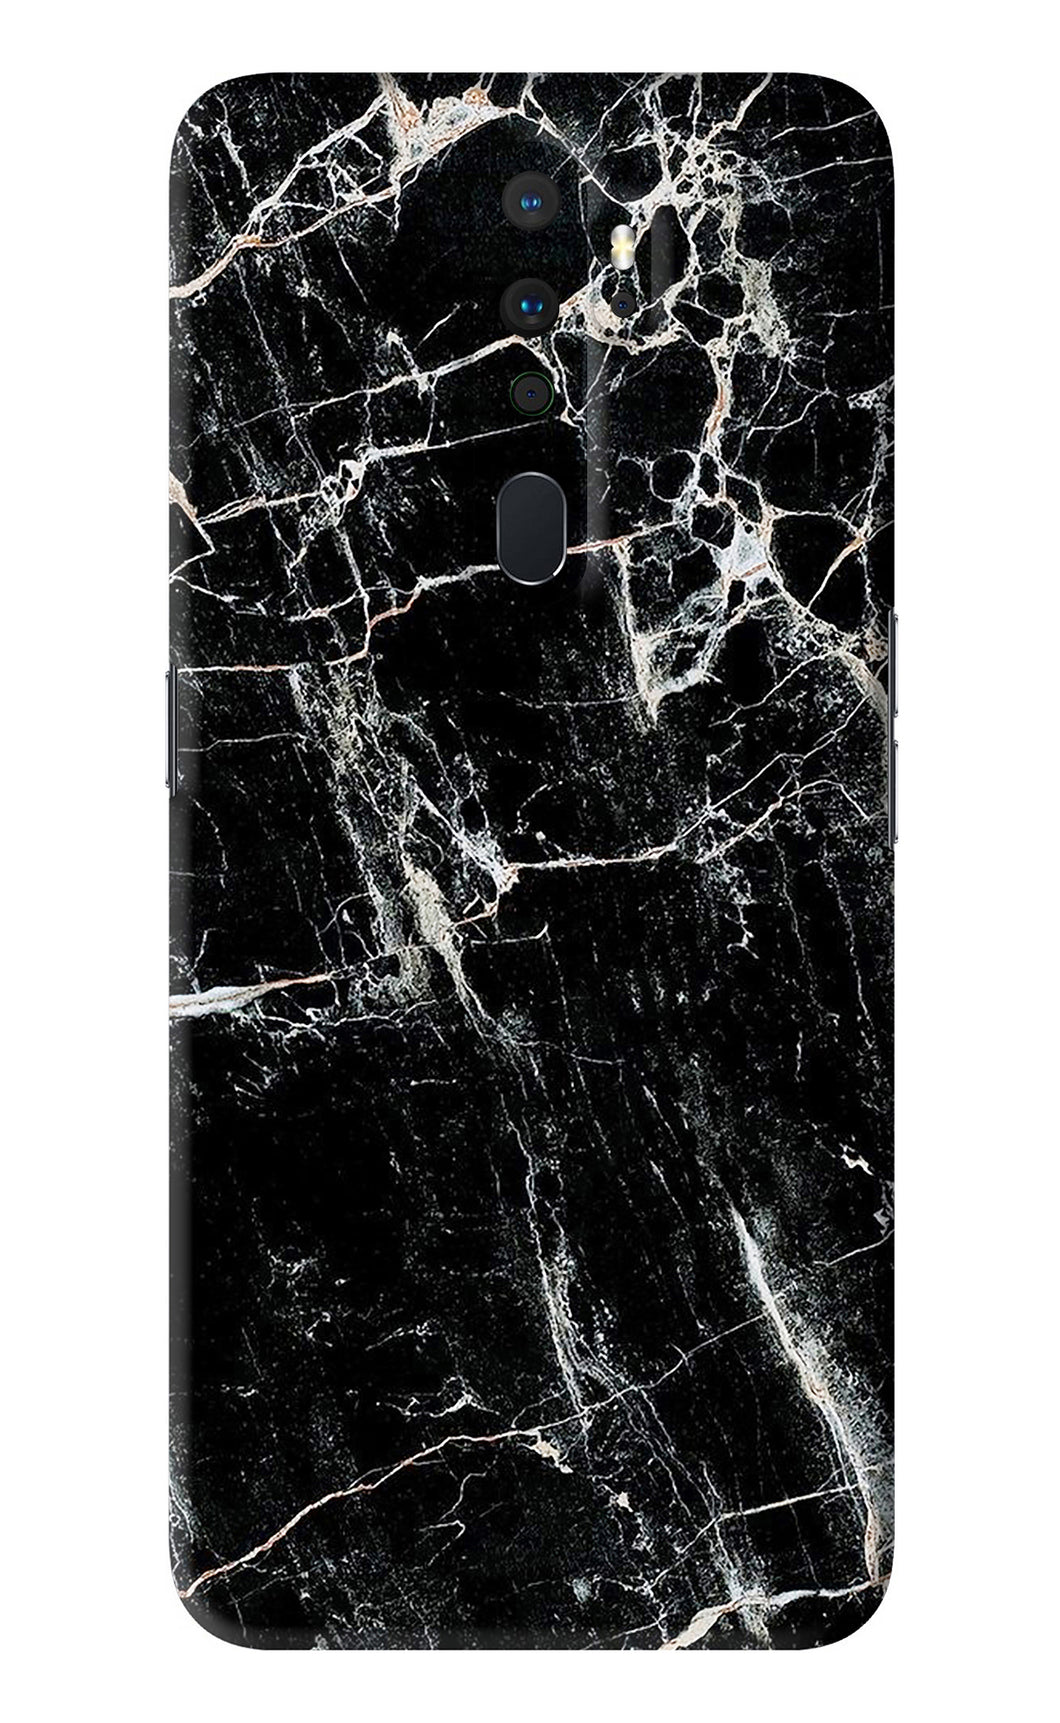 Black Marble Texture 1 Oppo A9 2020 Back Skin Wrap